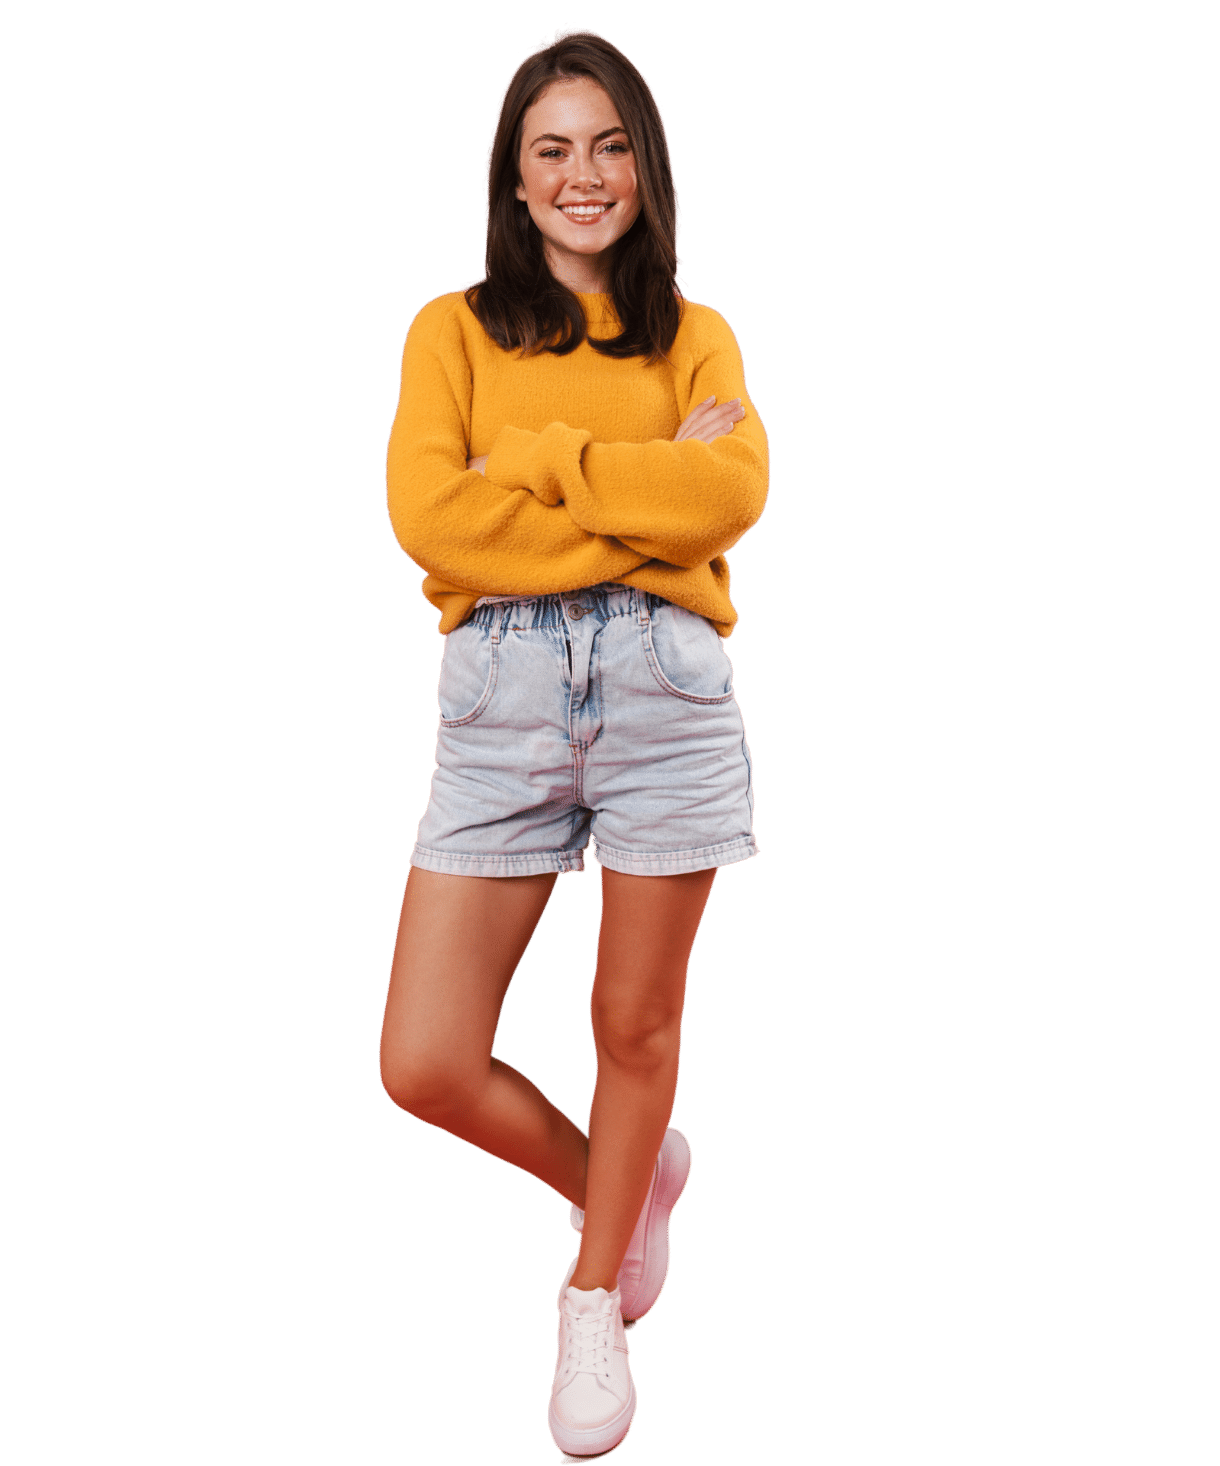 Woman in yellow sweater looking forward and smiling